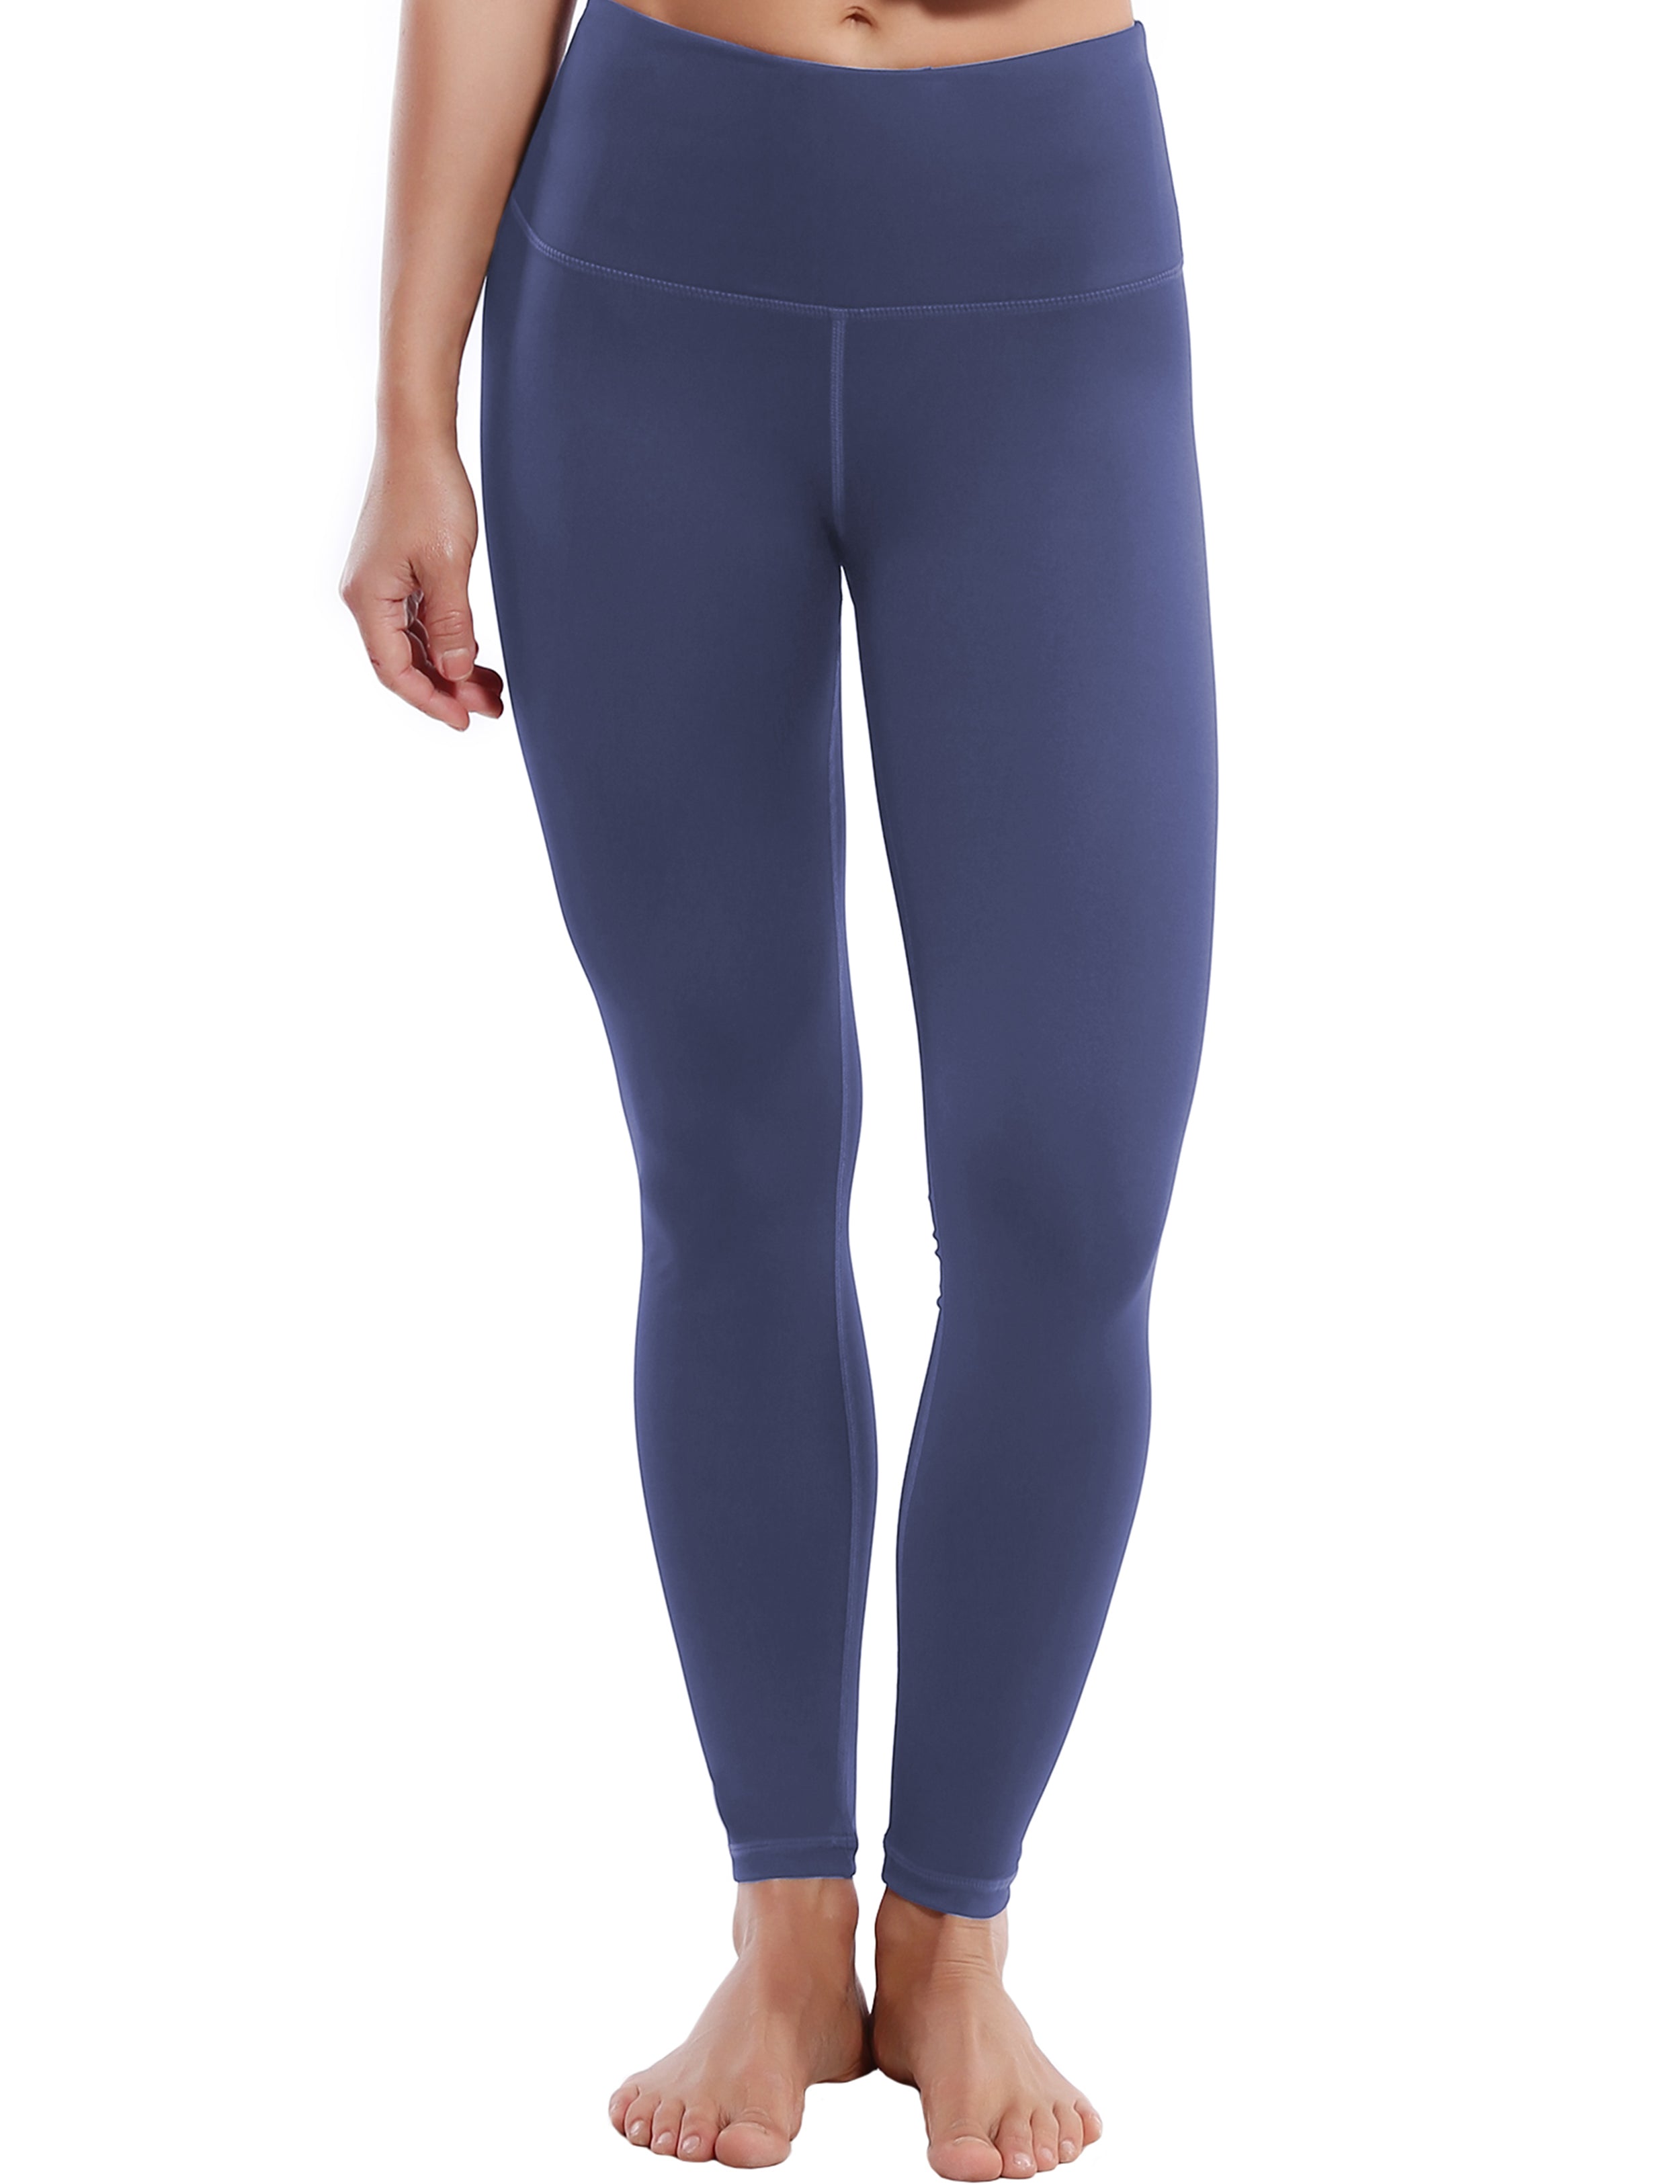 BUBBLELIME 4 Styles 25/26/27/28 High Waist Yoga Pants - Crotch Seamless  Compression_DARKNAVY XX-Small-26 Inseam at  Women's Clothing store